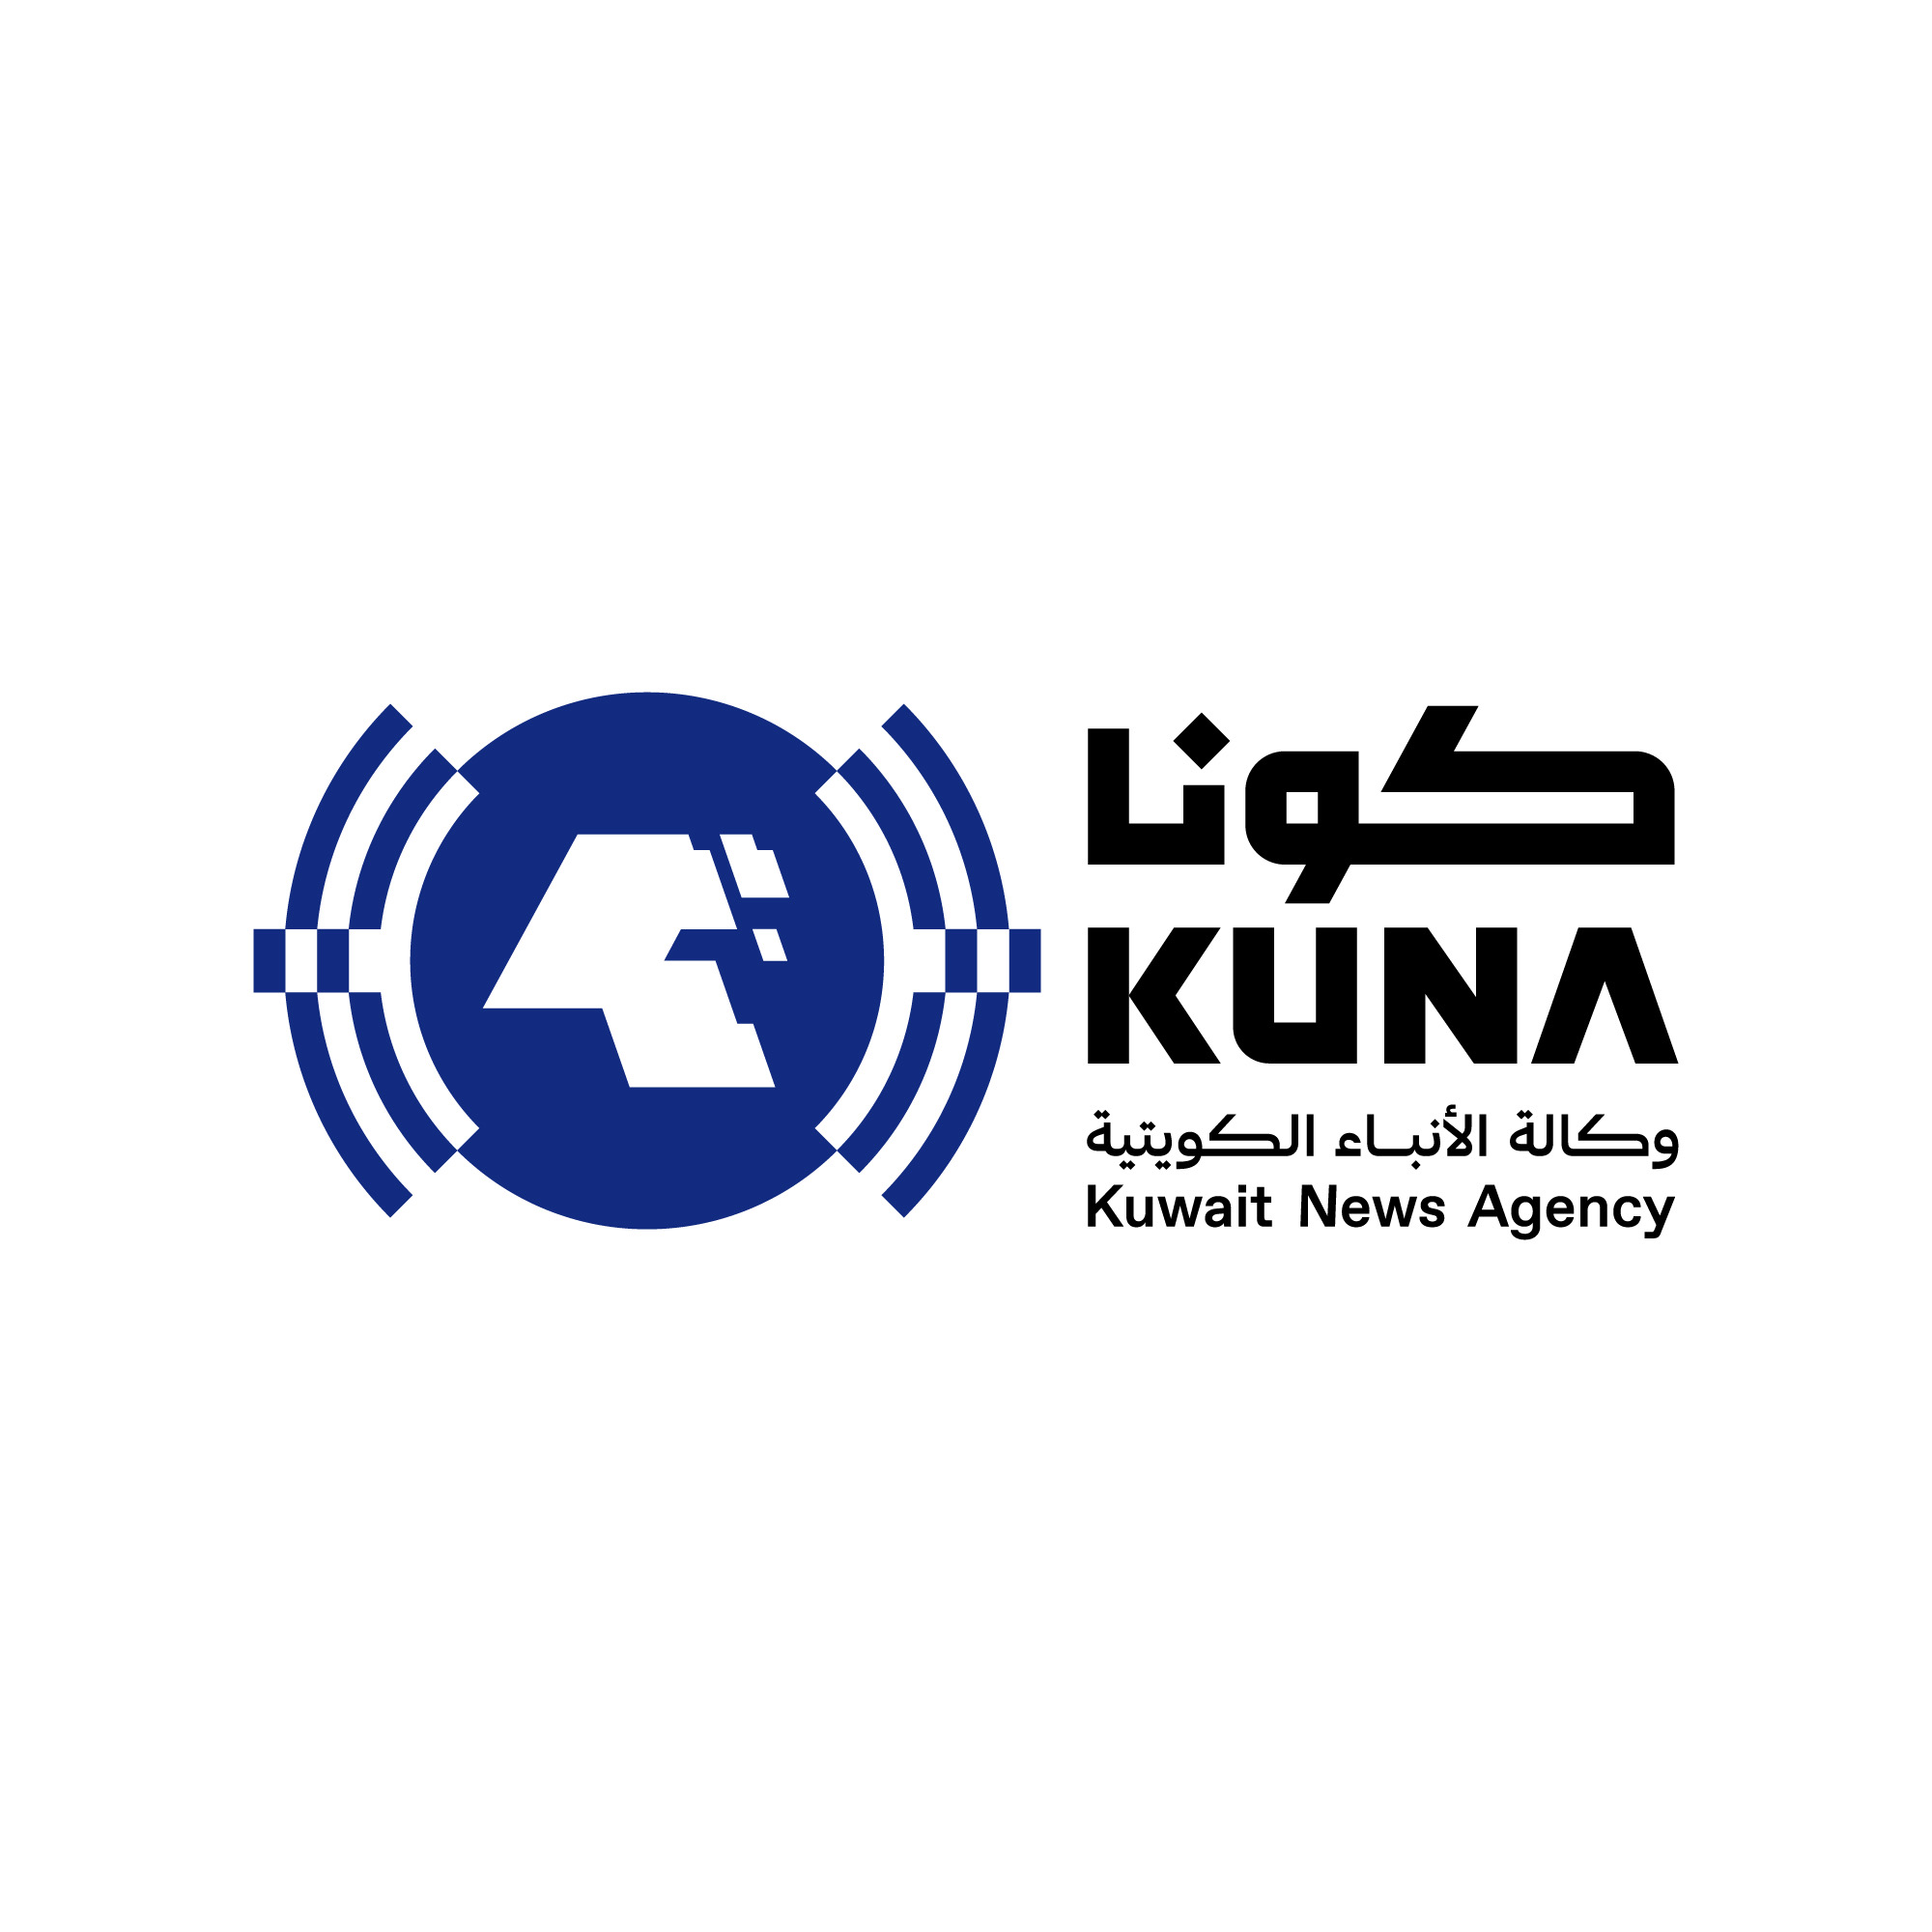 Briefing of KUNA main news for Wednesday until 00:00 GMT